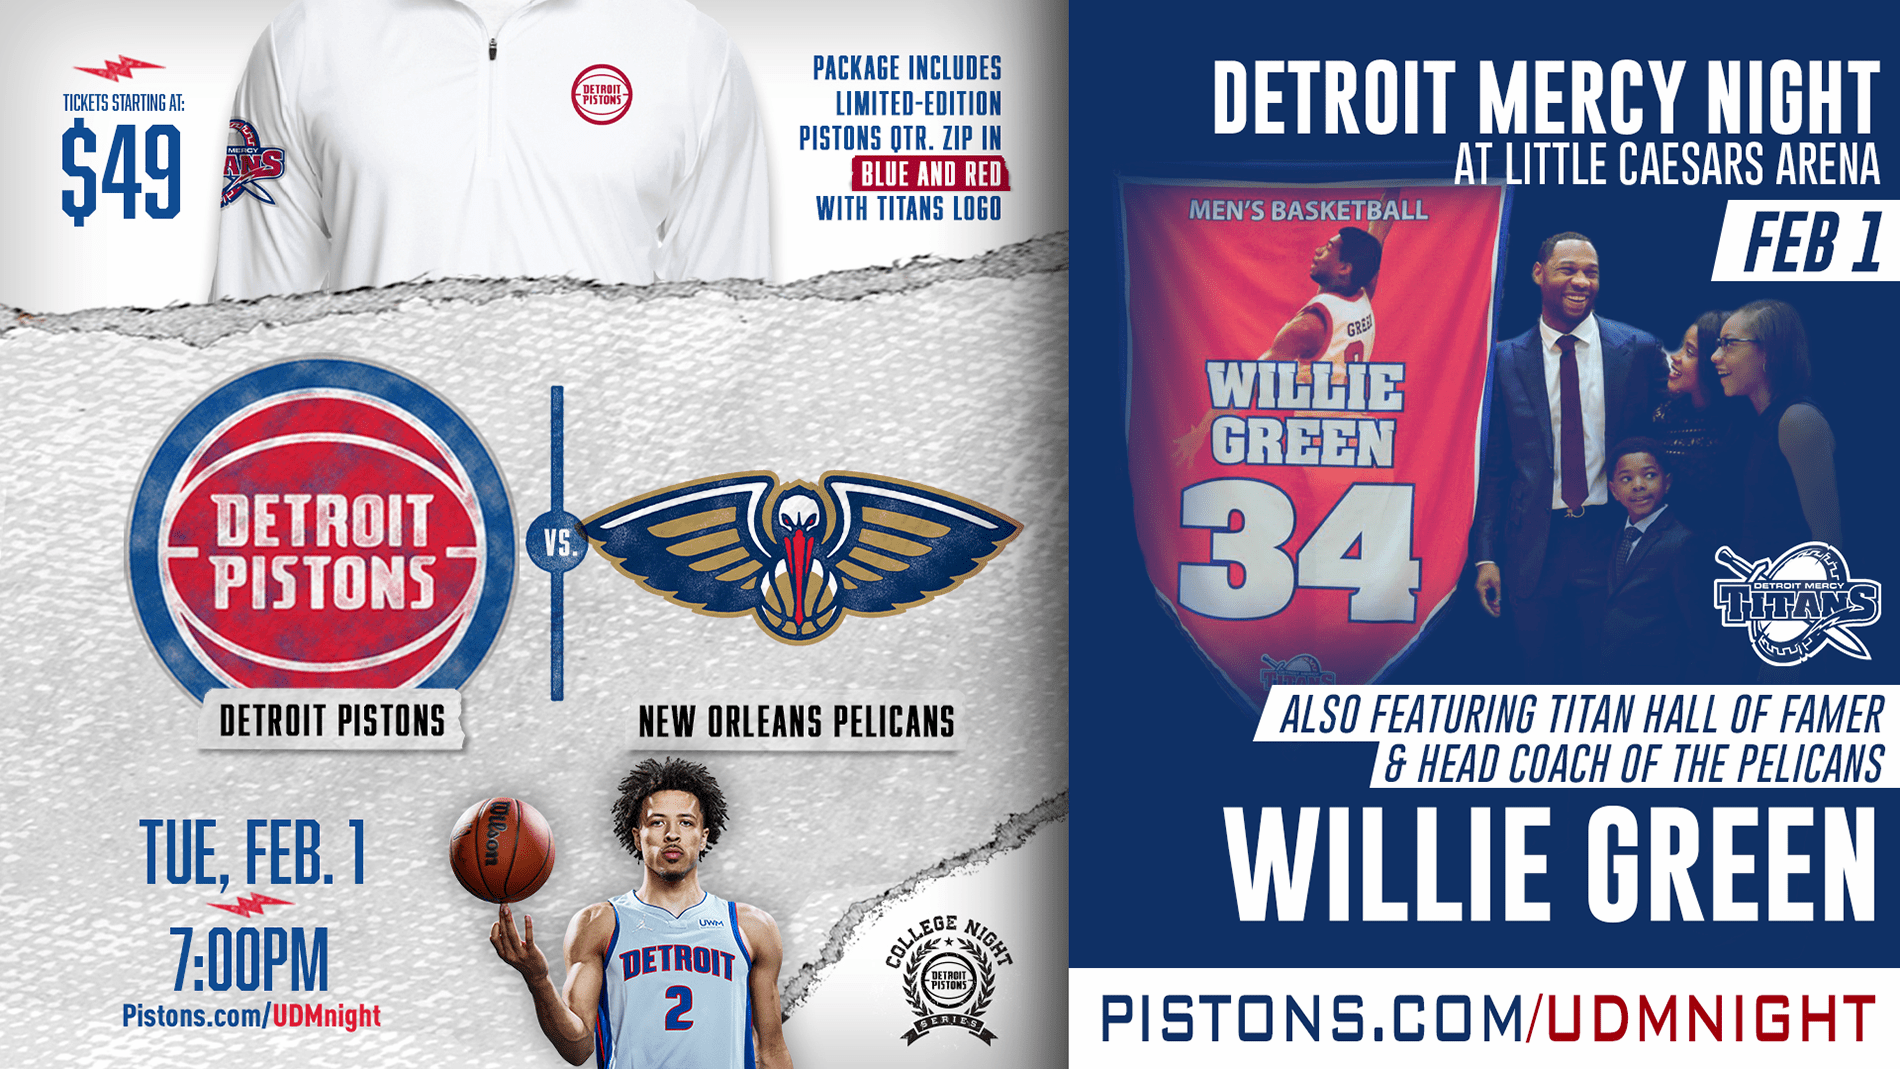 Graphic with pictures of Cade Cunningham and Willie Green and his family receiving when his number was retired. Text includes, Detroit Mercy Night at Little Caesars Arena, Feb. 1, Also featuring Titan Hall of Famer and head coach of the Pelicans, Willie Green, pistons.com/udmnight, Tickets starting at 49, package includes limited-edition pistons quarter zip in blue and red with Titans logo, Tuesday, Feb. 1, 7 p.m., College Night Series. Also shows Detroit Pistons and New Orleans Pelicans logos.